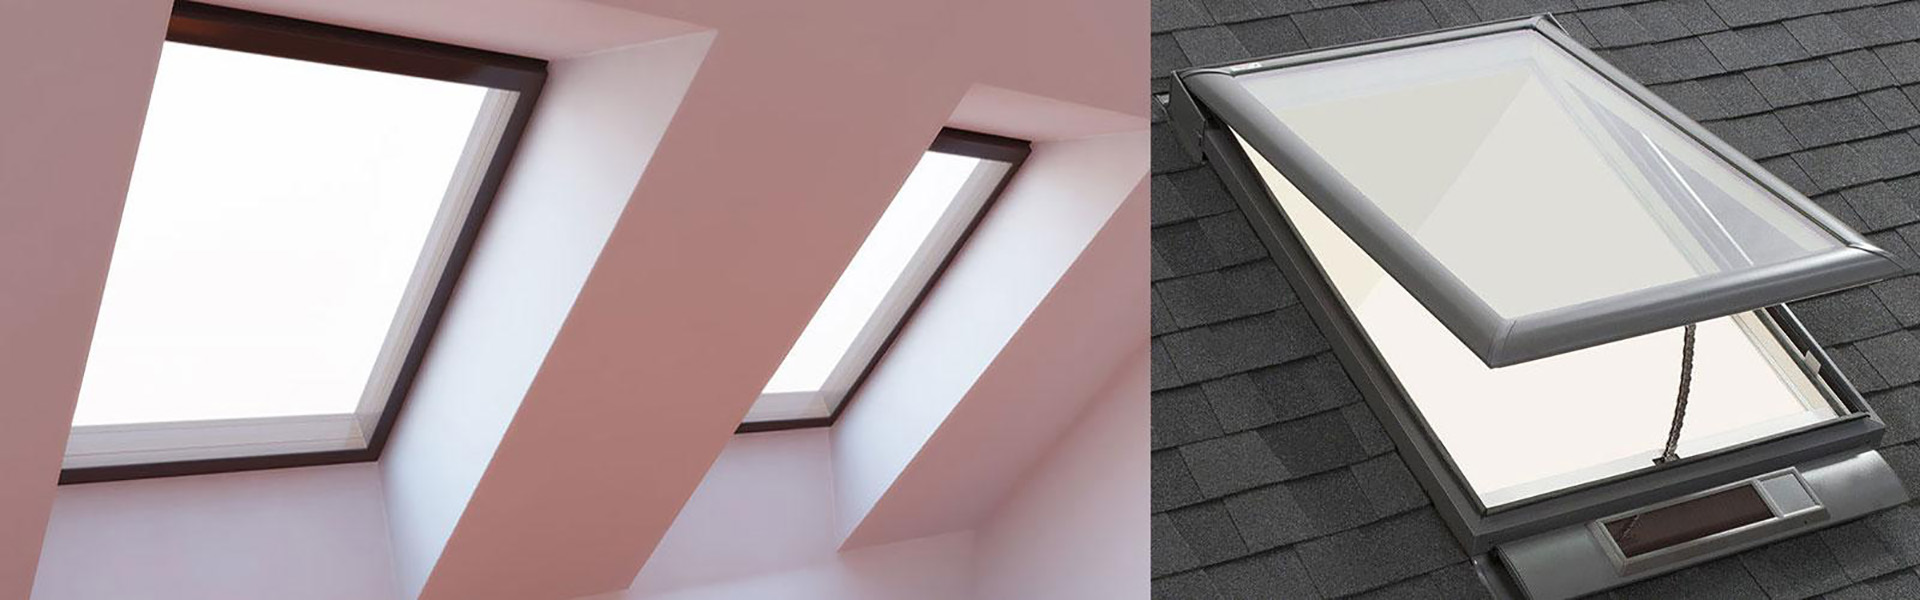 Interior and exterior shot of skylights